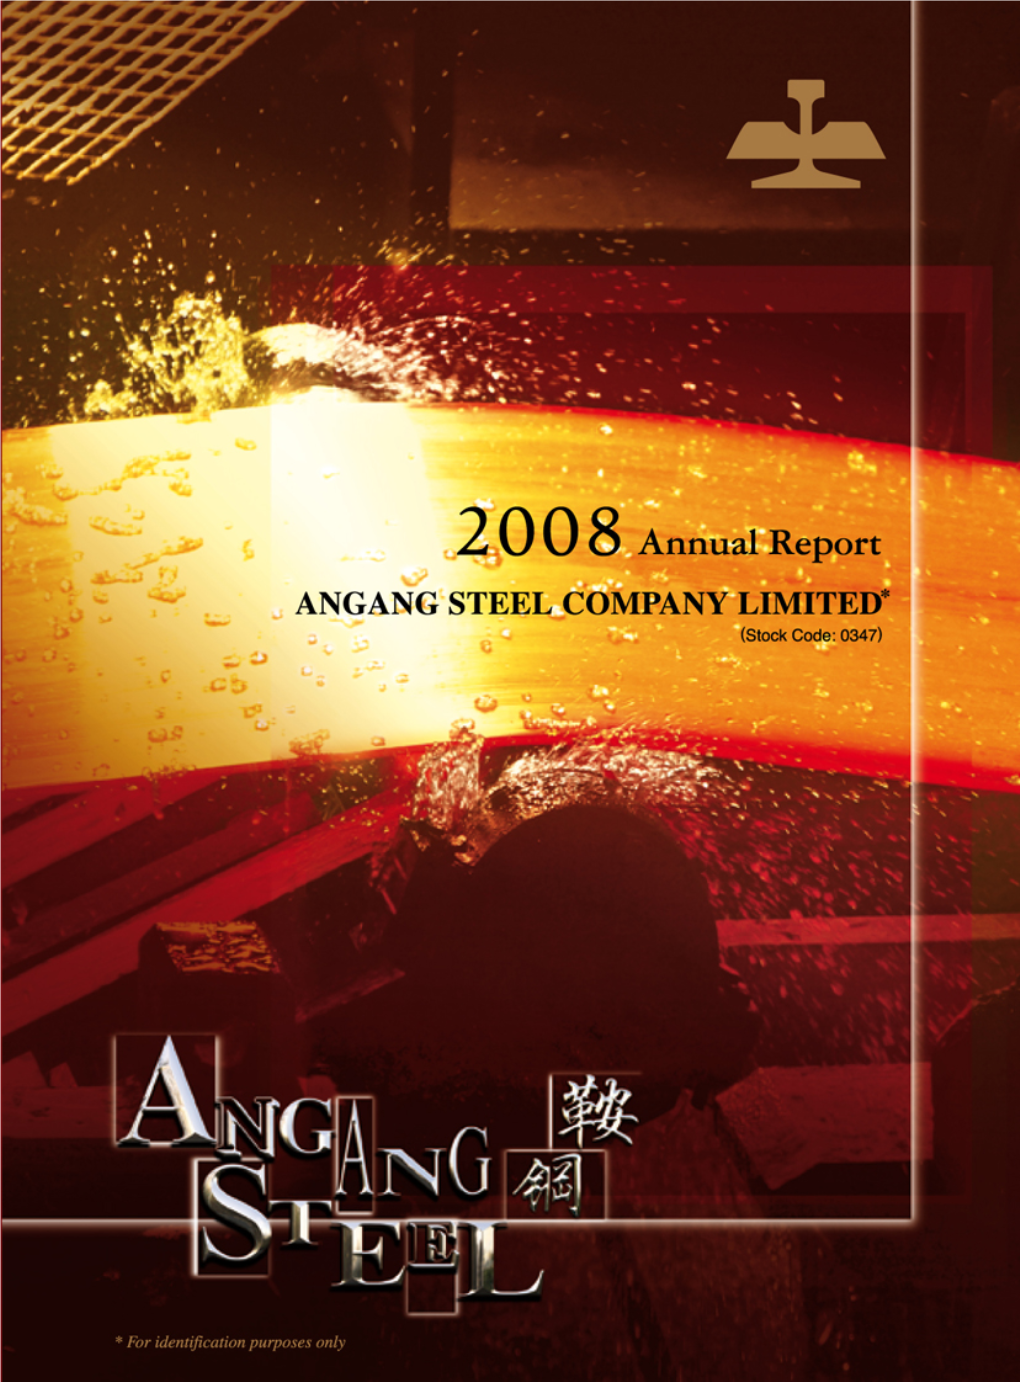 Annual Report, and Severally and Jointly Warrant and Undertake for the Truthfulness, Accuracy, and Completeness of the Contents of This Annual Report